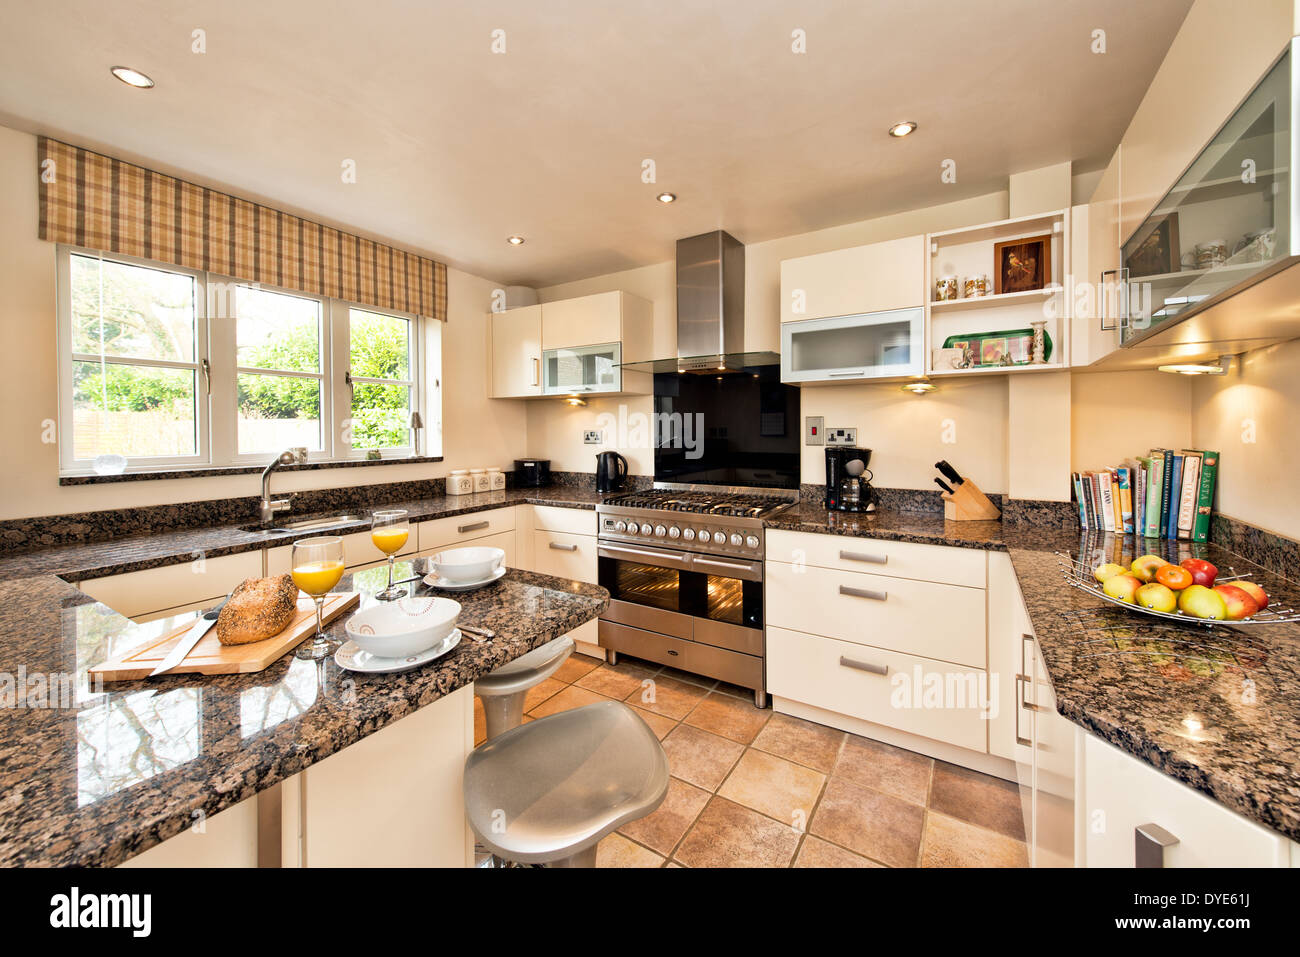 The interior of a modern fitted domestic kitchen with range, cabinets & granite work surfaces Stock Photo